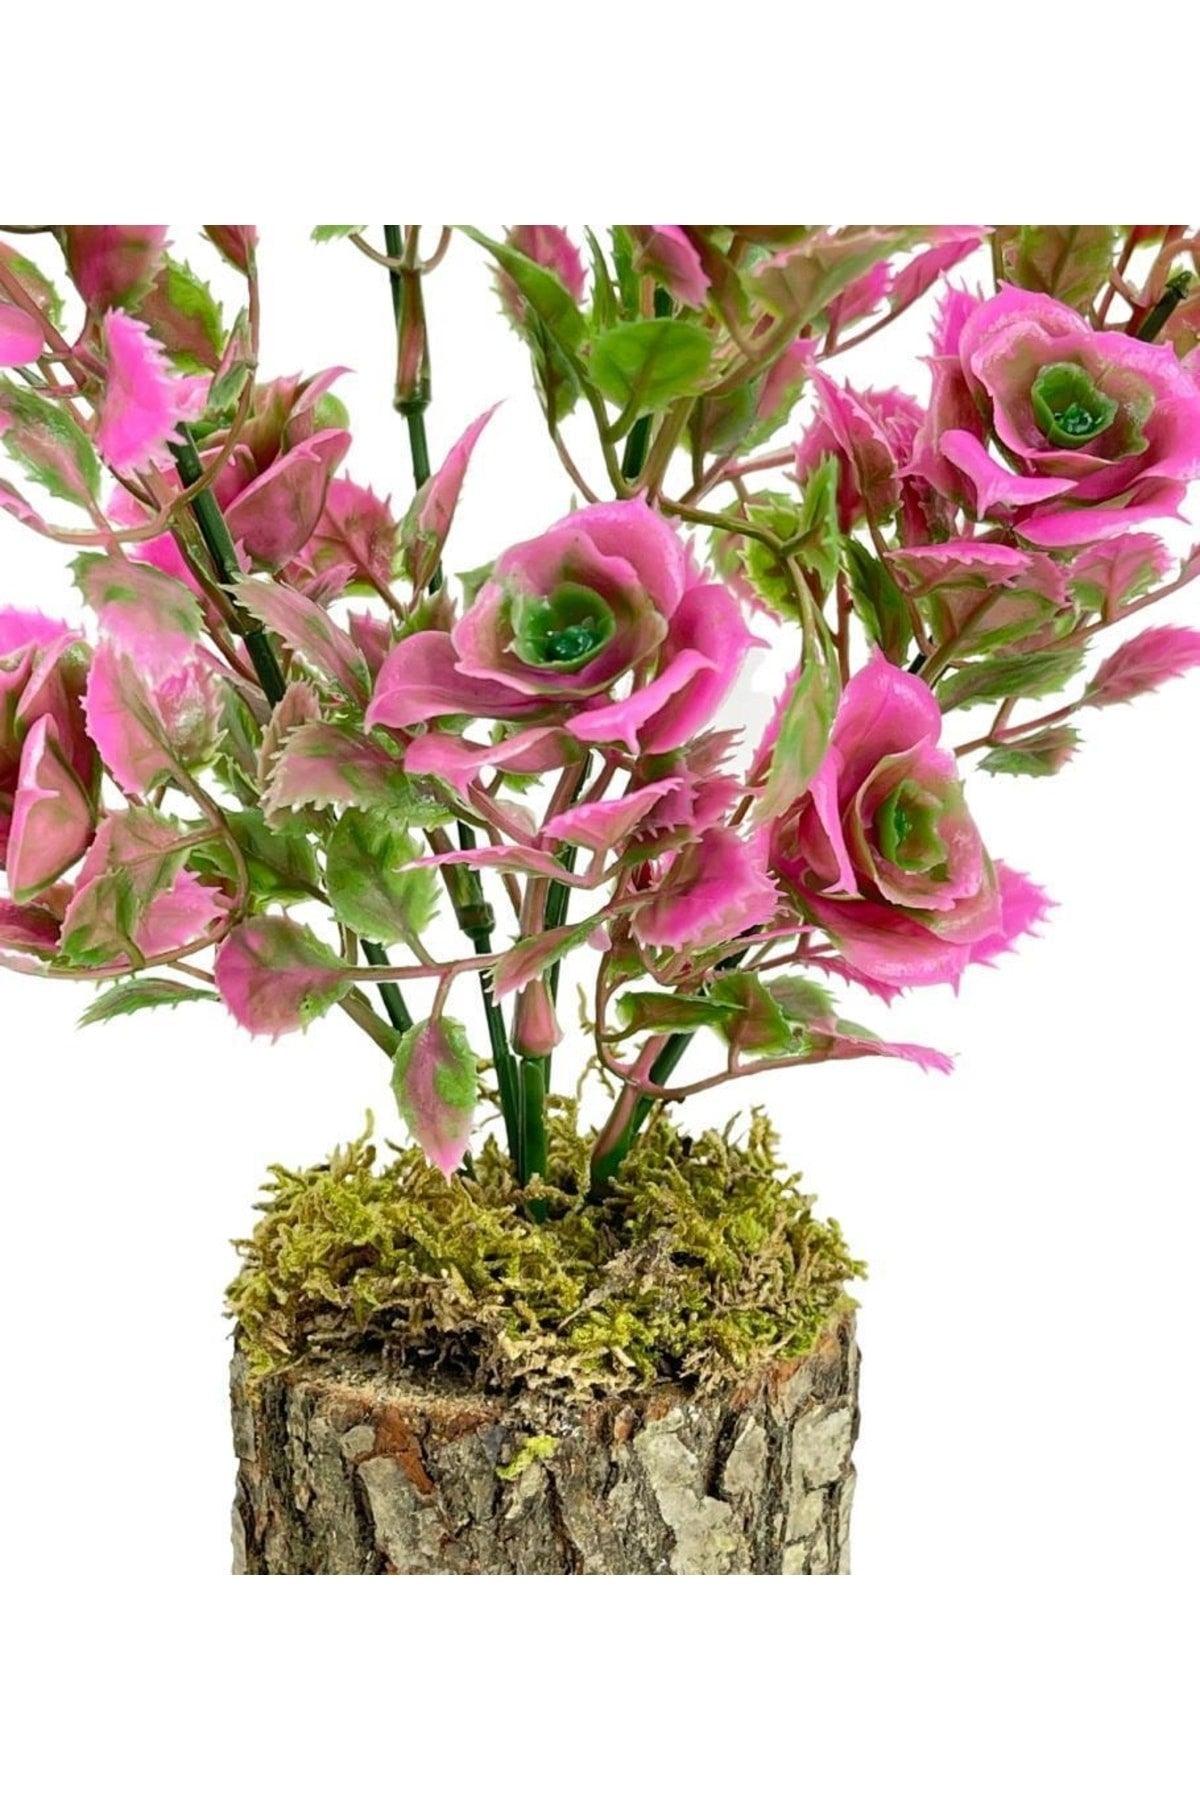 Artificial Flowers Decorative Table Flower With Pink Green Leaves On A Log 30*20cm - Swordslife